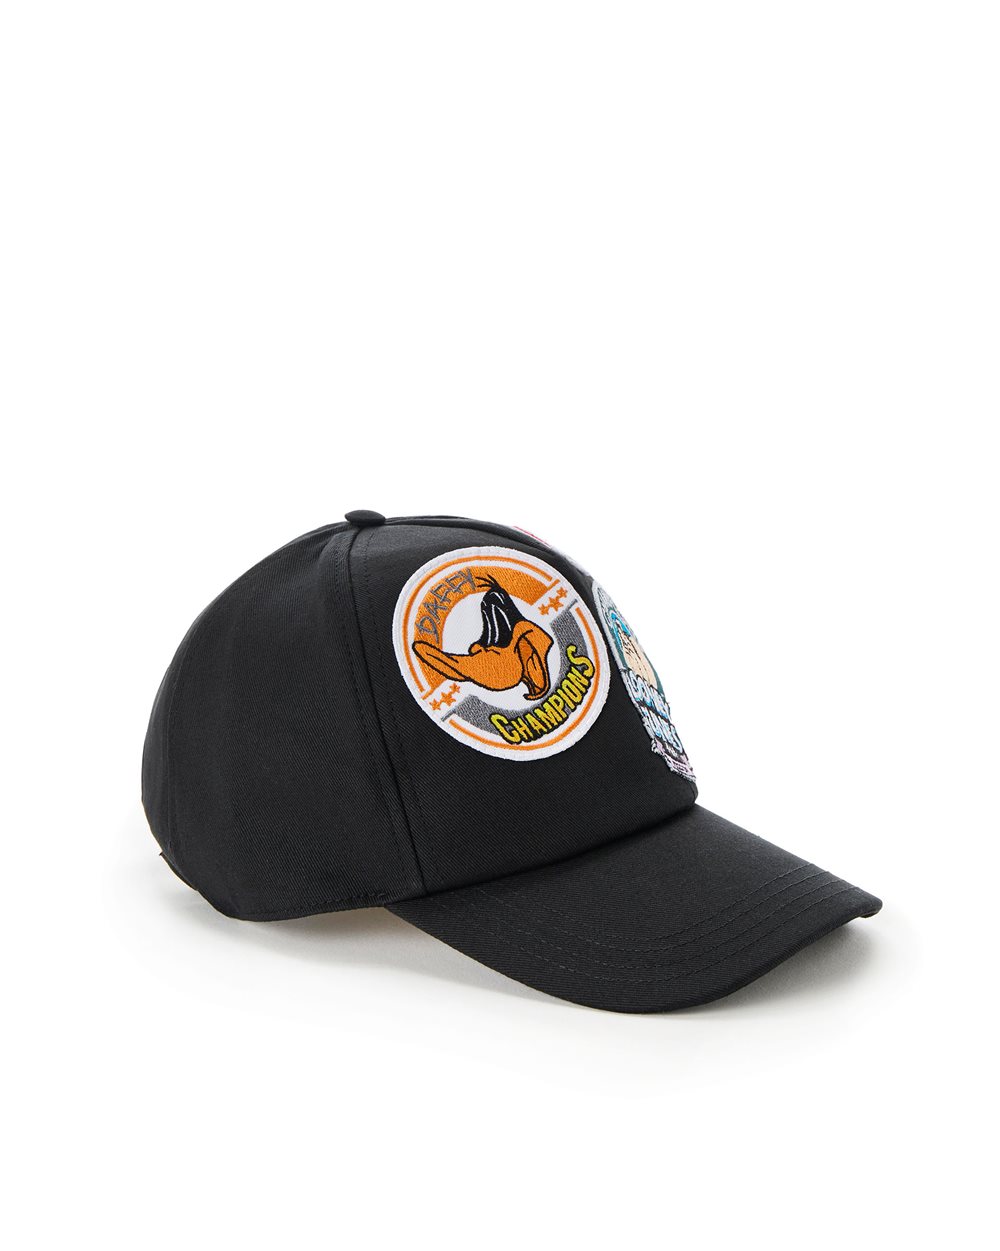 Baseball cap with cartoon patches and logo - ( SECONDO STEP IT ) PROMO SALDI UP TO 50% | Iceberg - Official Website